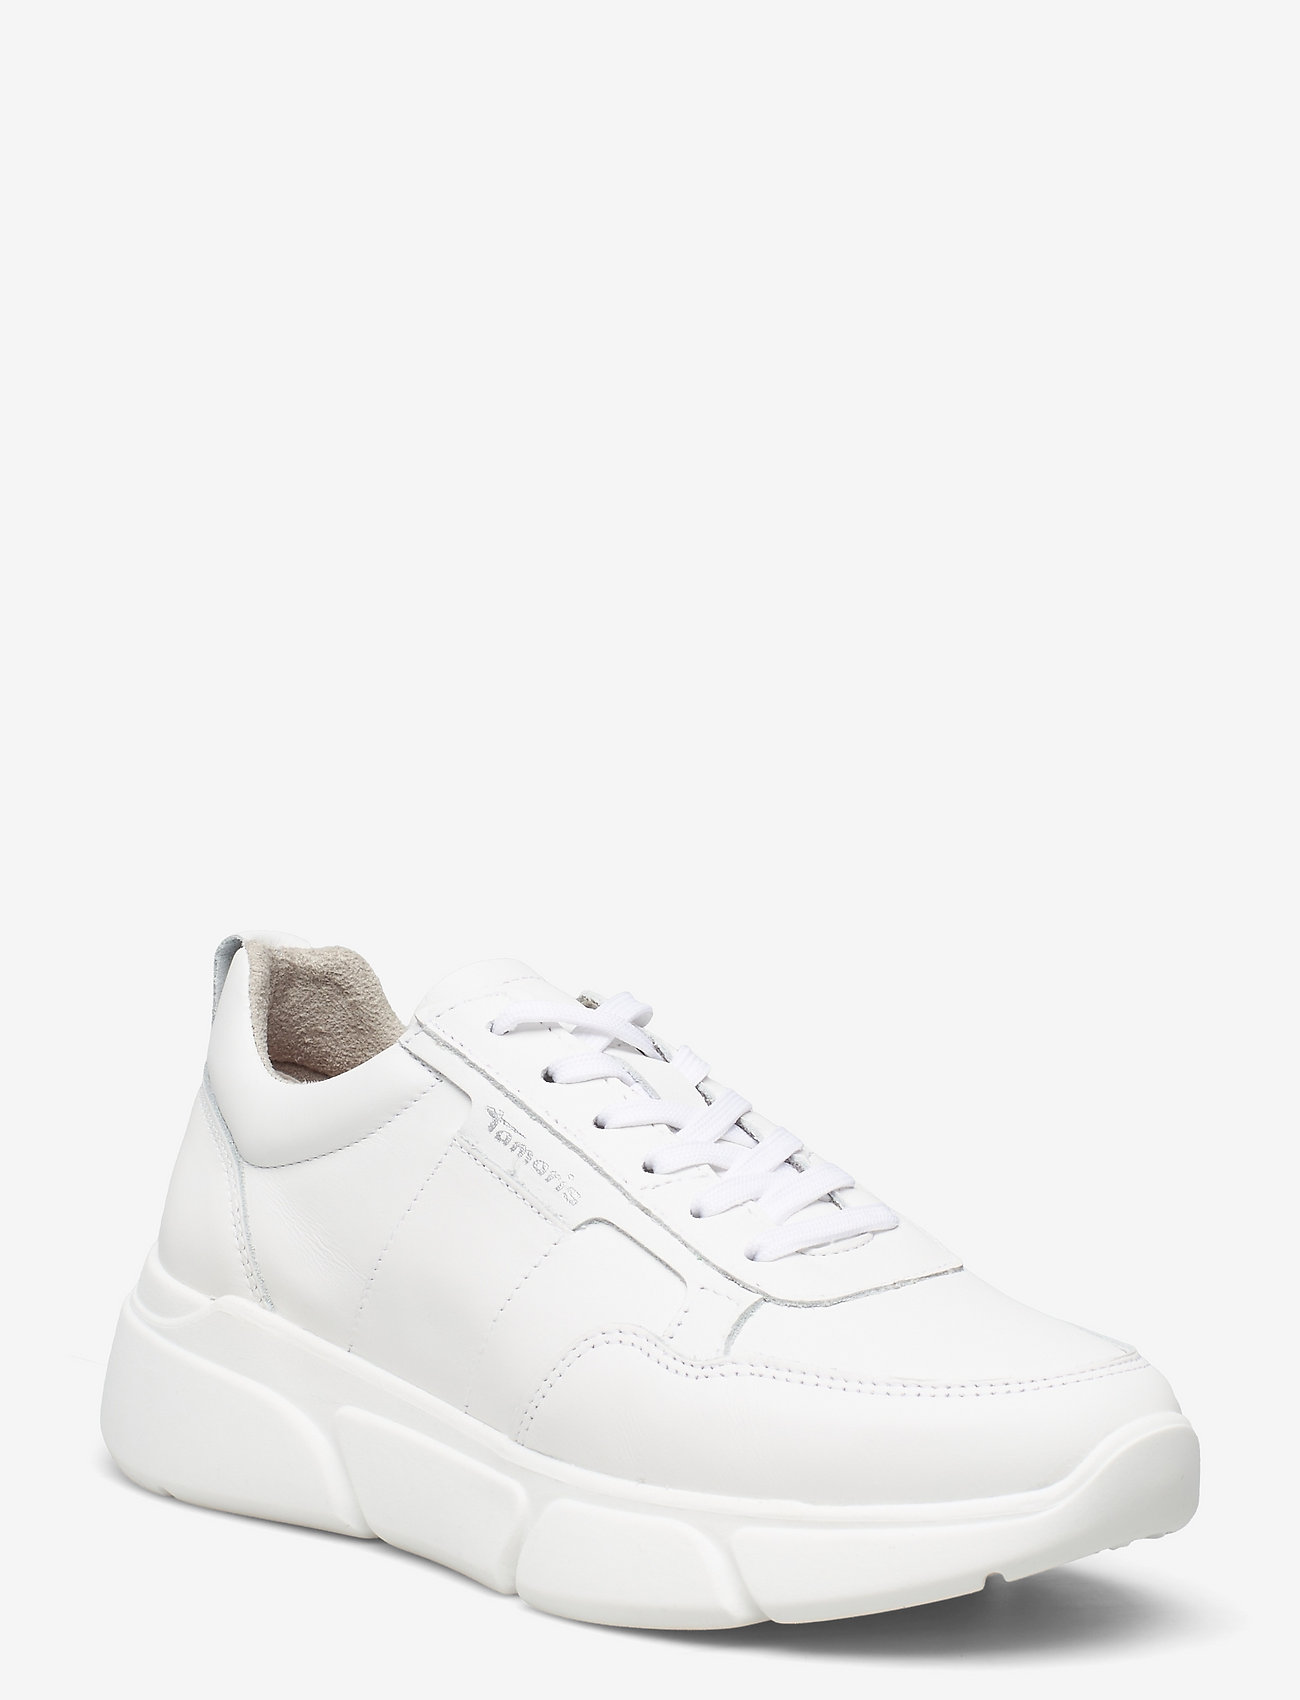 Tamaris Woms Lace-up - Low top sneakers | Boozt.com